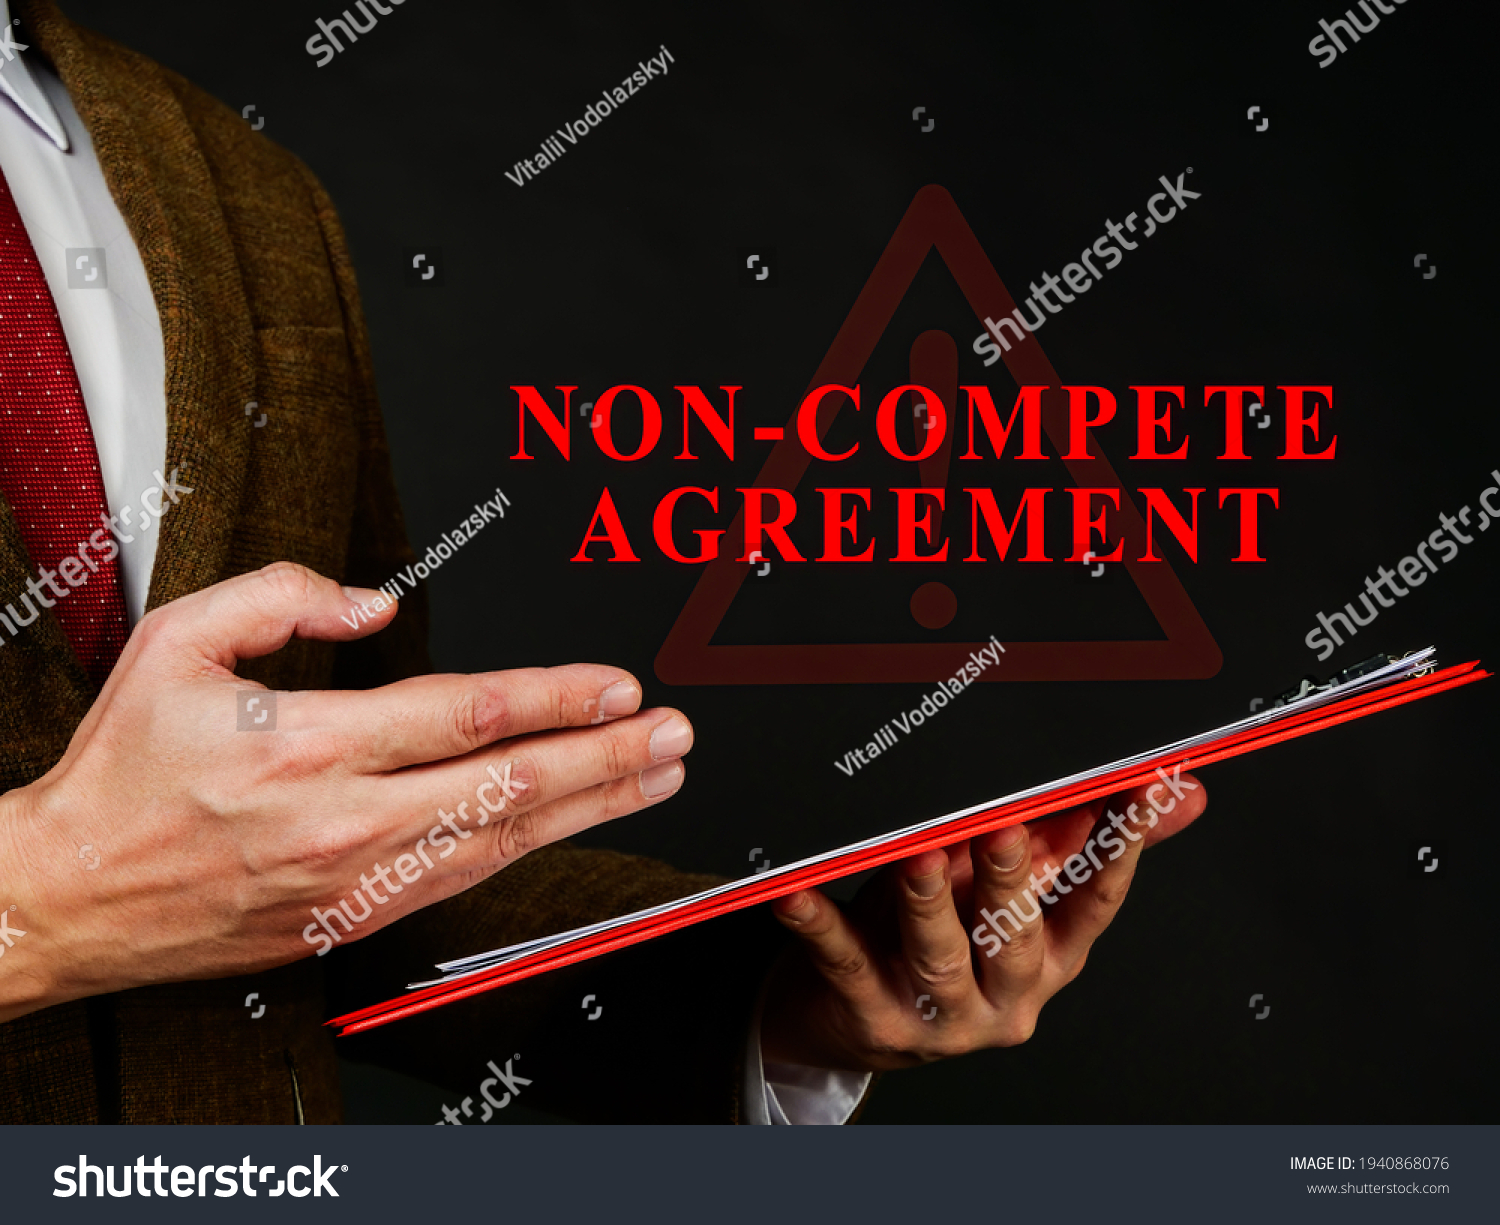 Non compete agreement or clause in the red folder. #1940868076